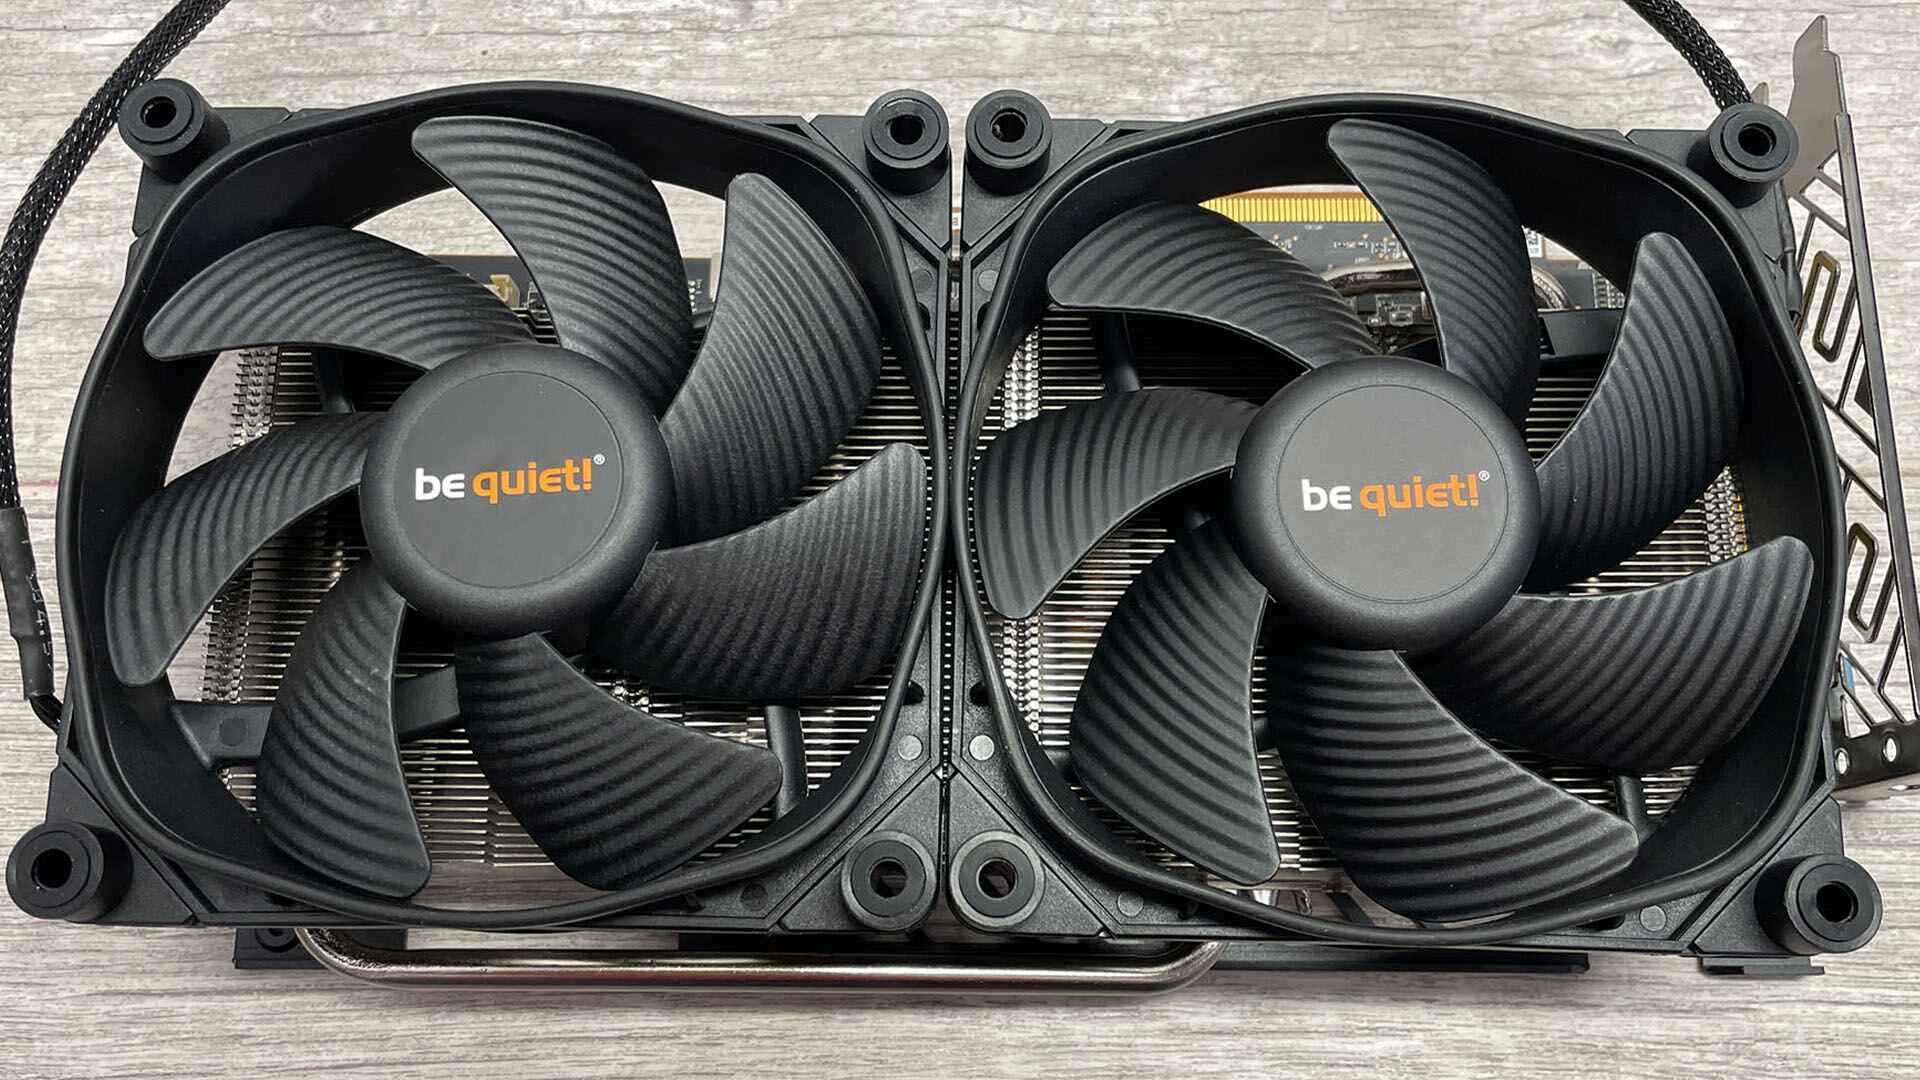 How To Put More Fans In PC Case